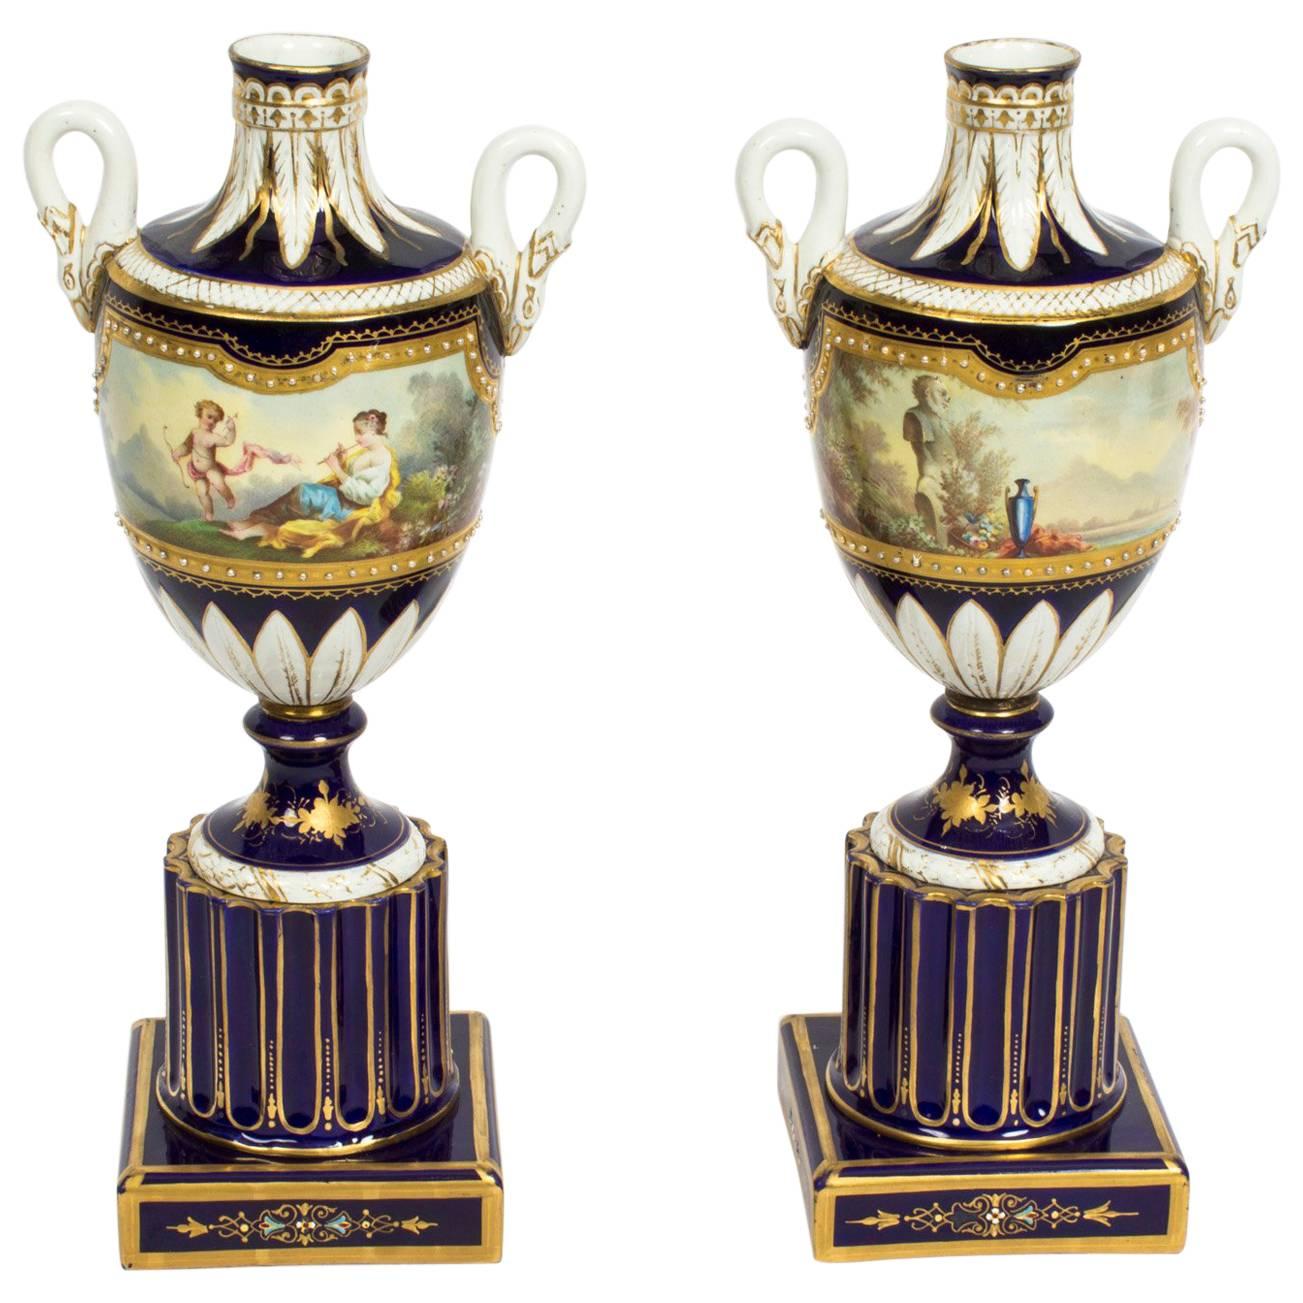 Antique Pair of French Sevres Porcelain Vases, 19th Century